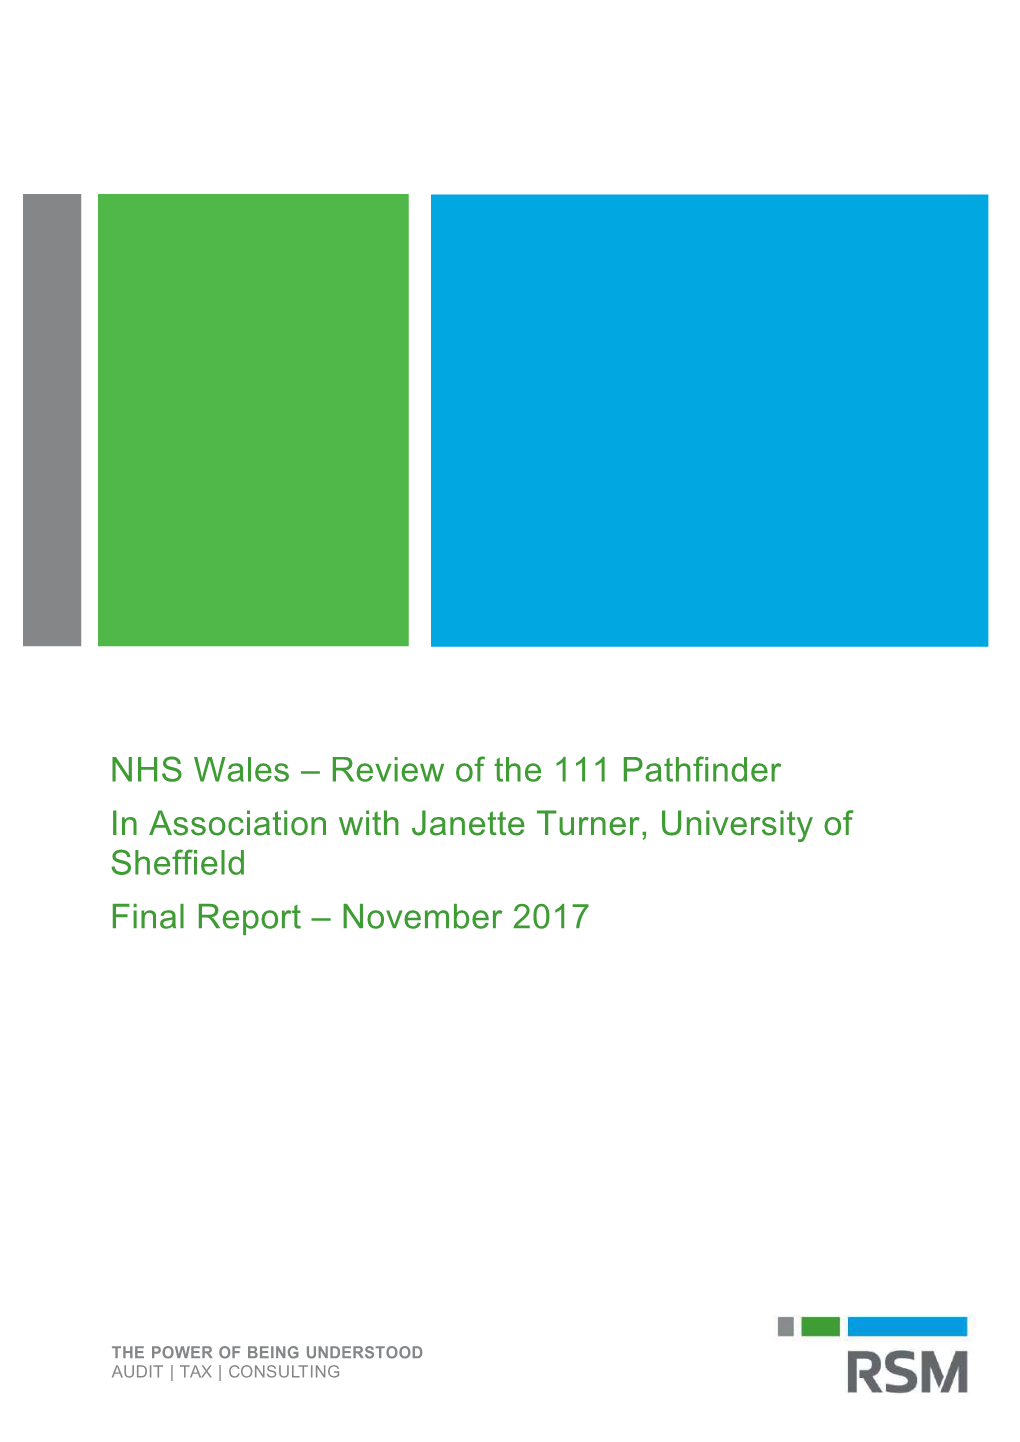 NHS Wales – Review of the 111 Pathfinder in Association with Janette Turner, University of Sheffield Final Report – November 2017